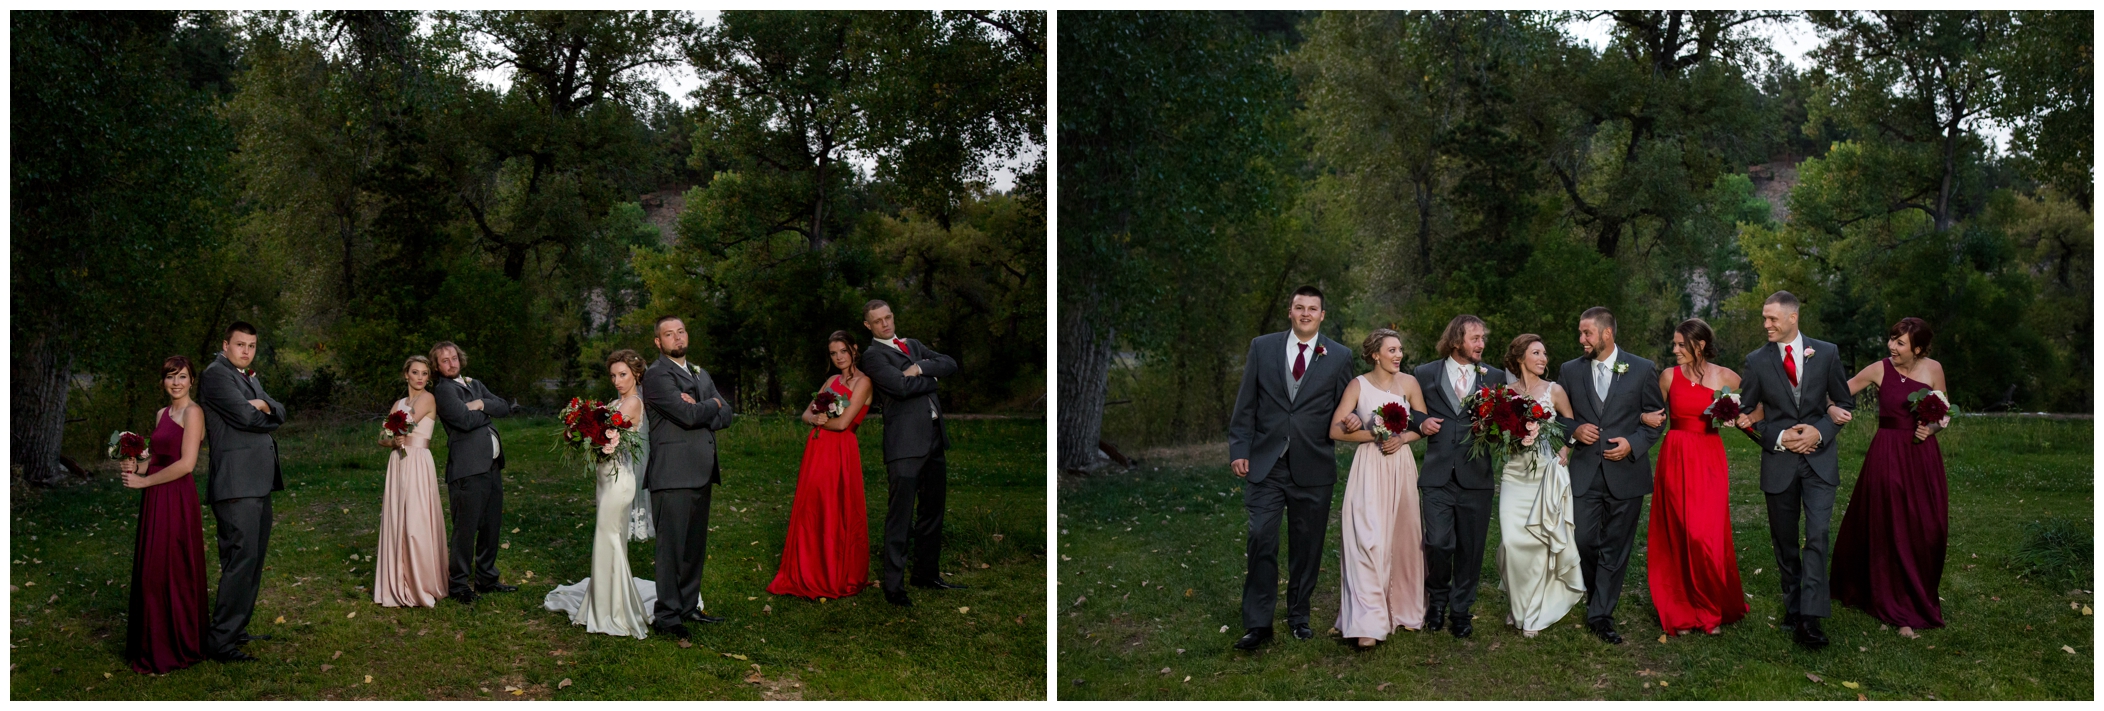 wedding party photography at Wedgewood Boulder